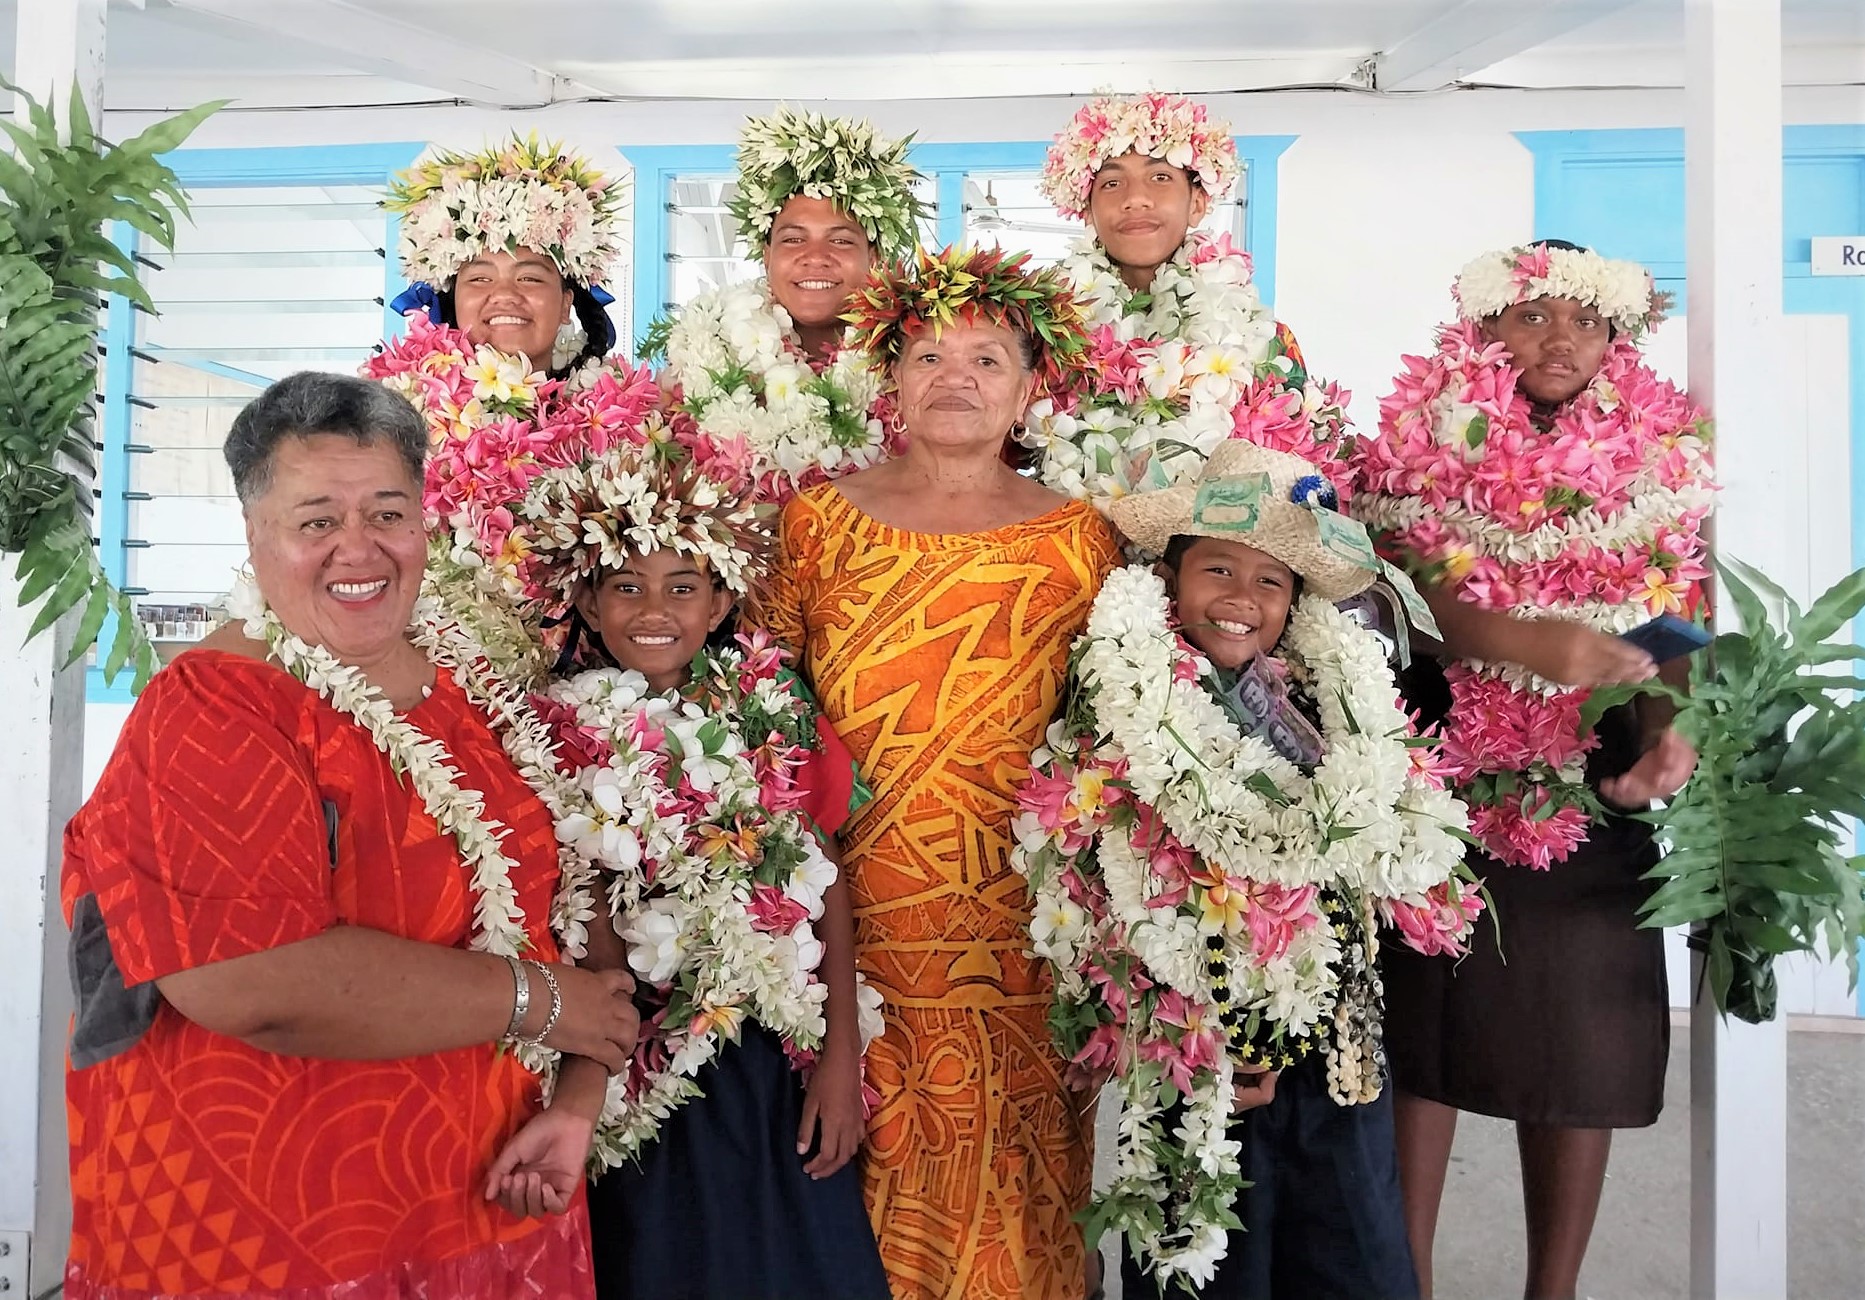 Six prefects inducted to lead Manihiki schools of Tukao and Ruamanu